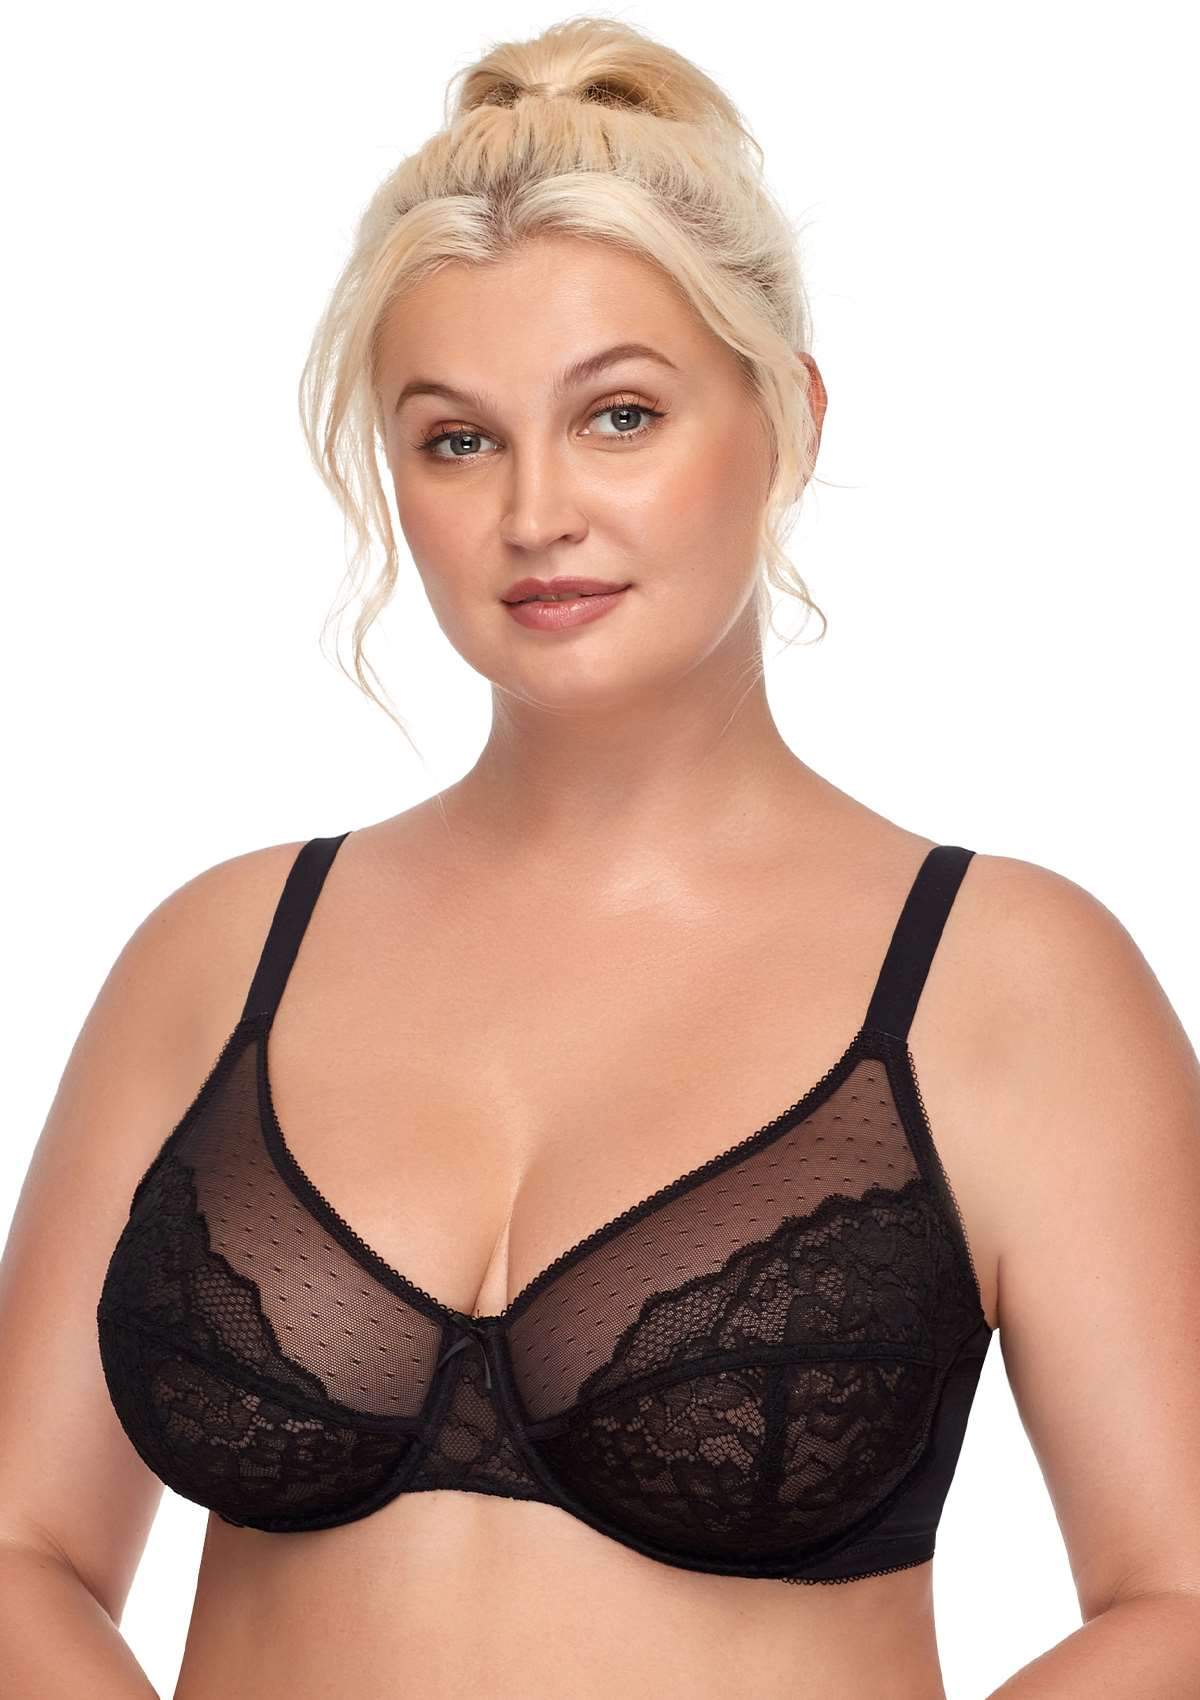 HSIA Enchante Lace Wire Bra For Lifting And Separating Large Breasts - Black / 38 / G